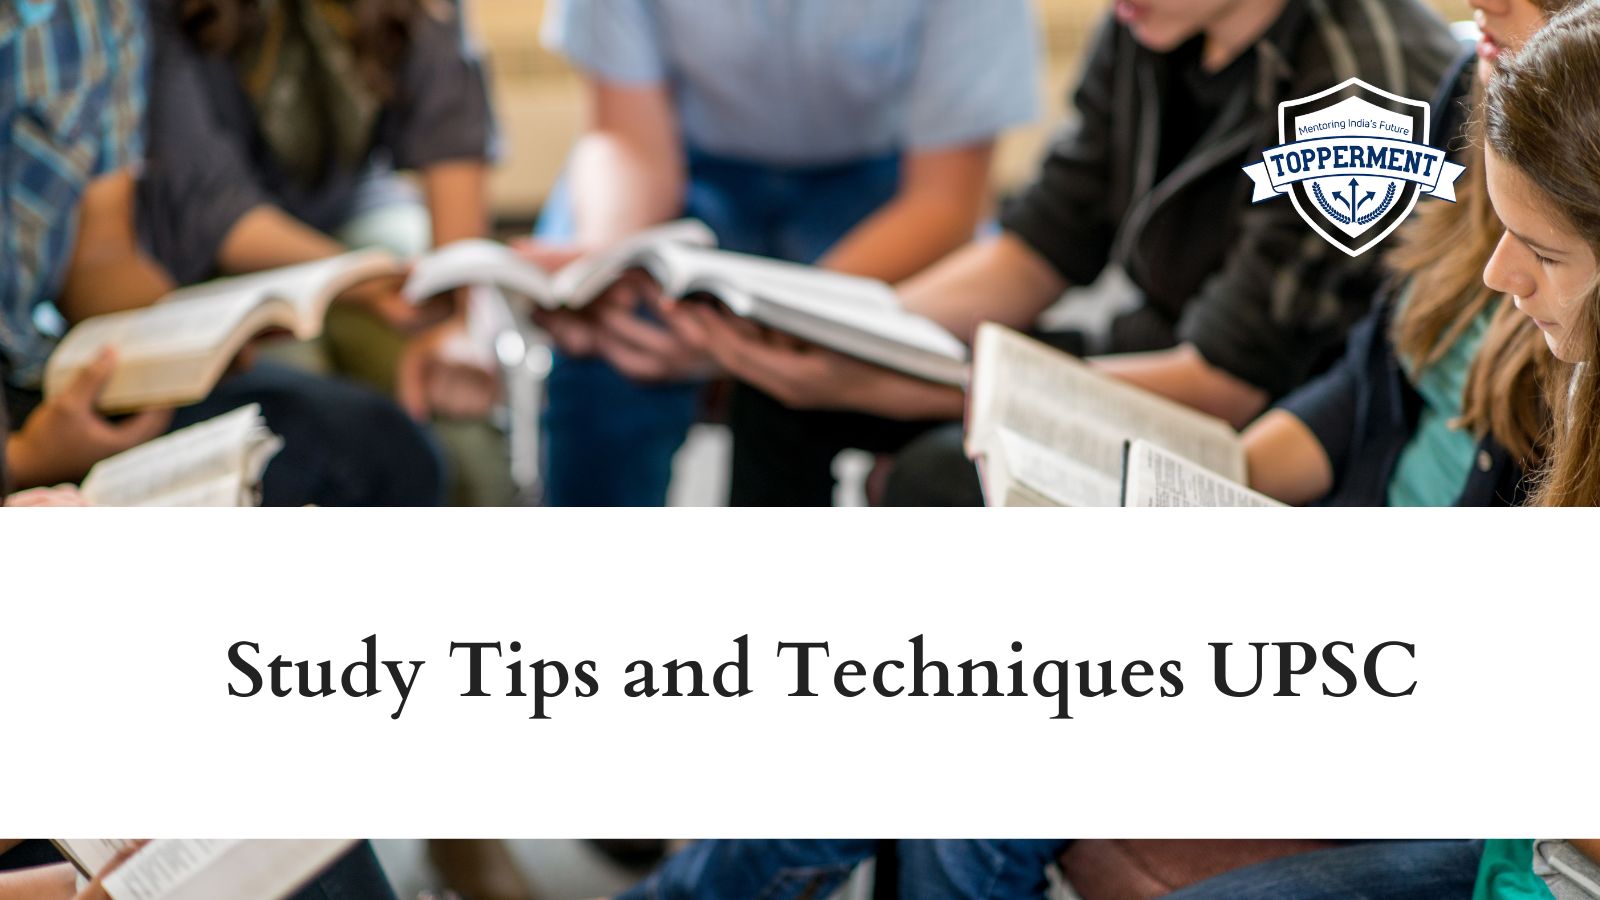 Study-Tips-and-Techniques-UPSC-Best-UPSC-IAS-Coaching-For-Mentorship-And-Guidance